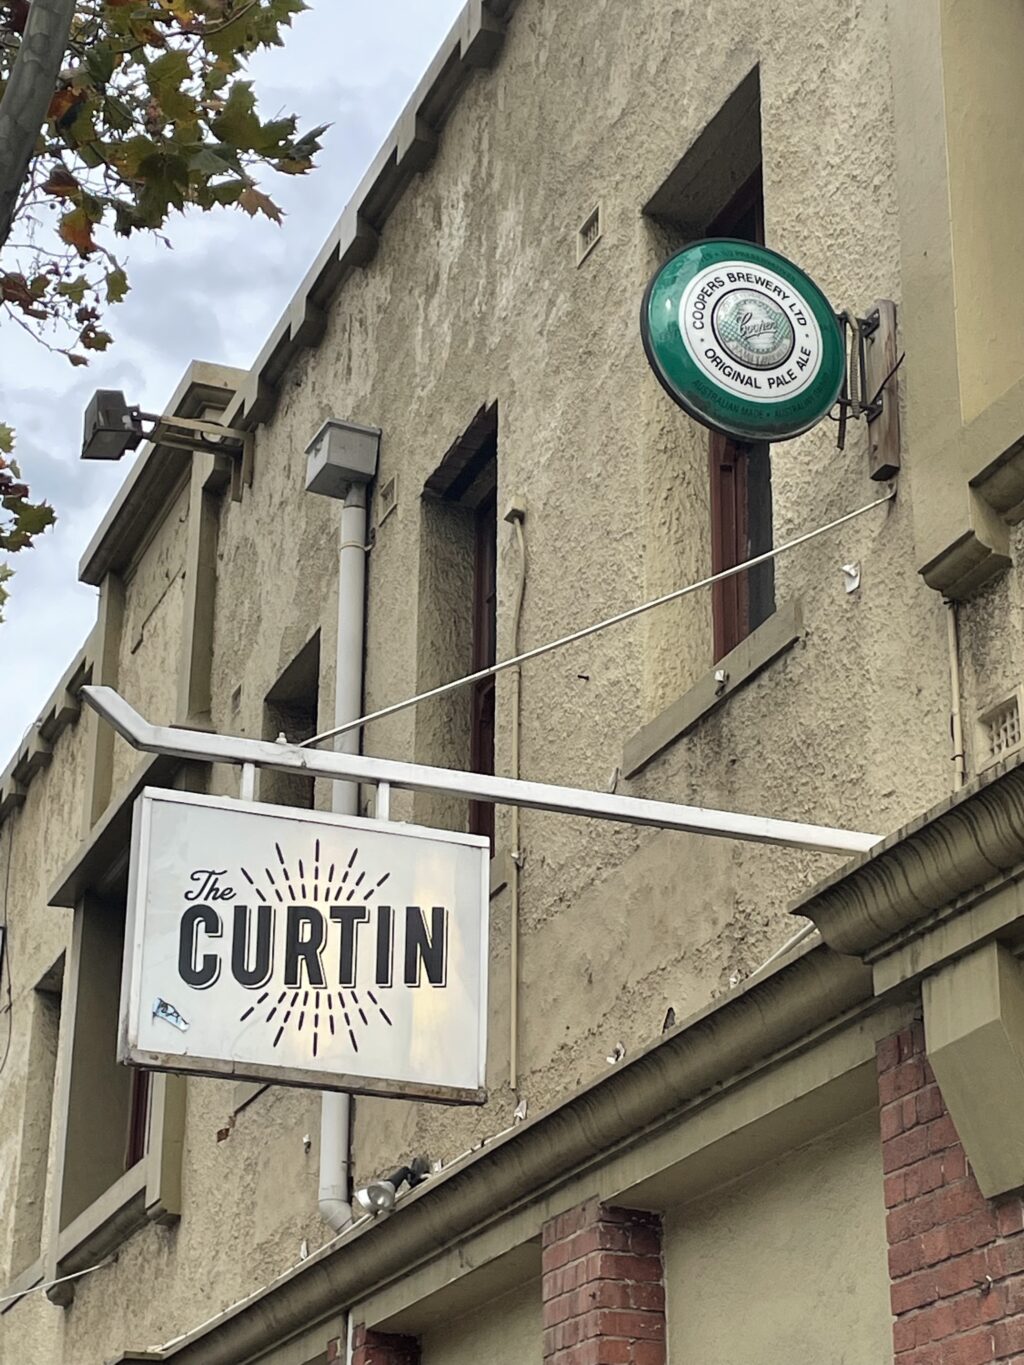 HAVE YOUR SAY – Support heritage protection for the John Curtin Hotel